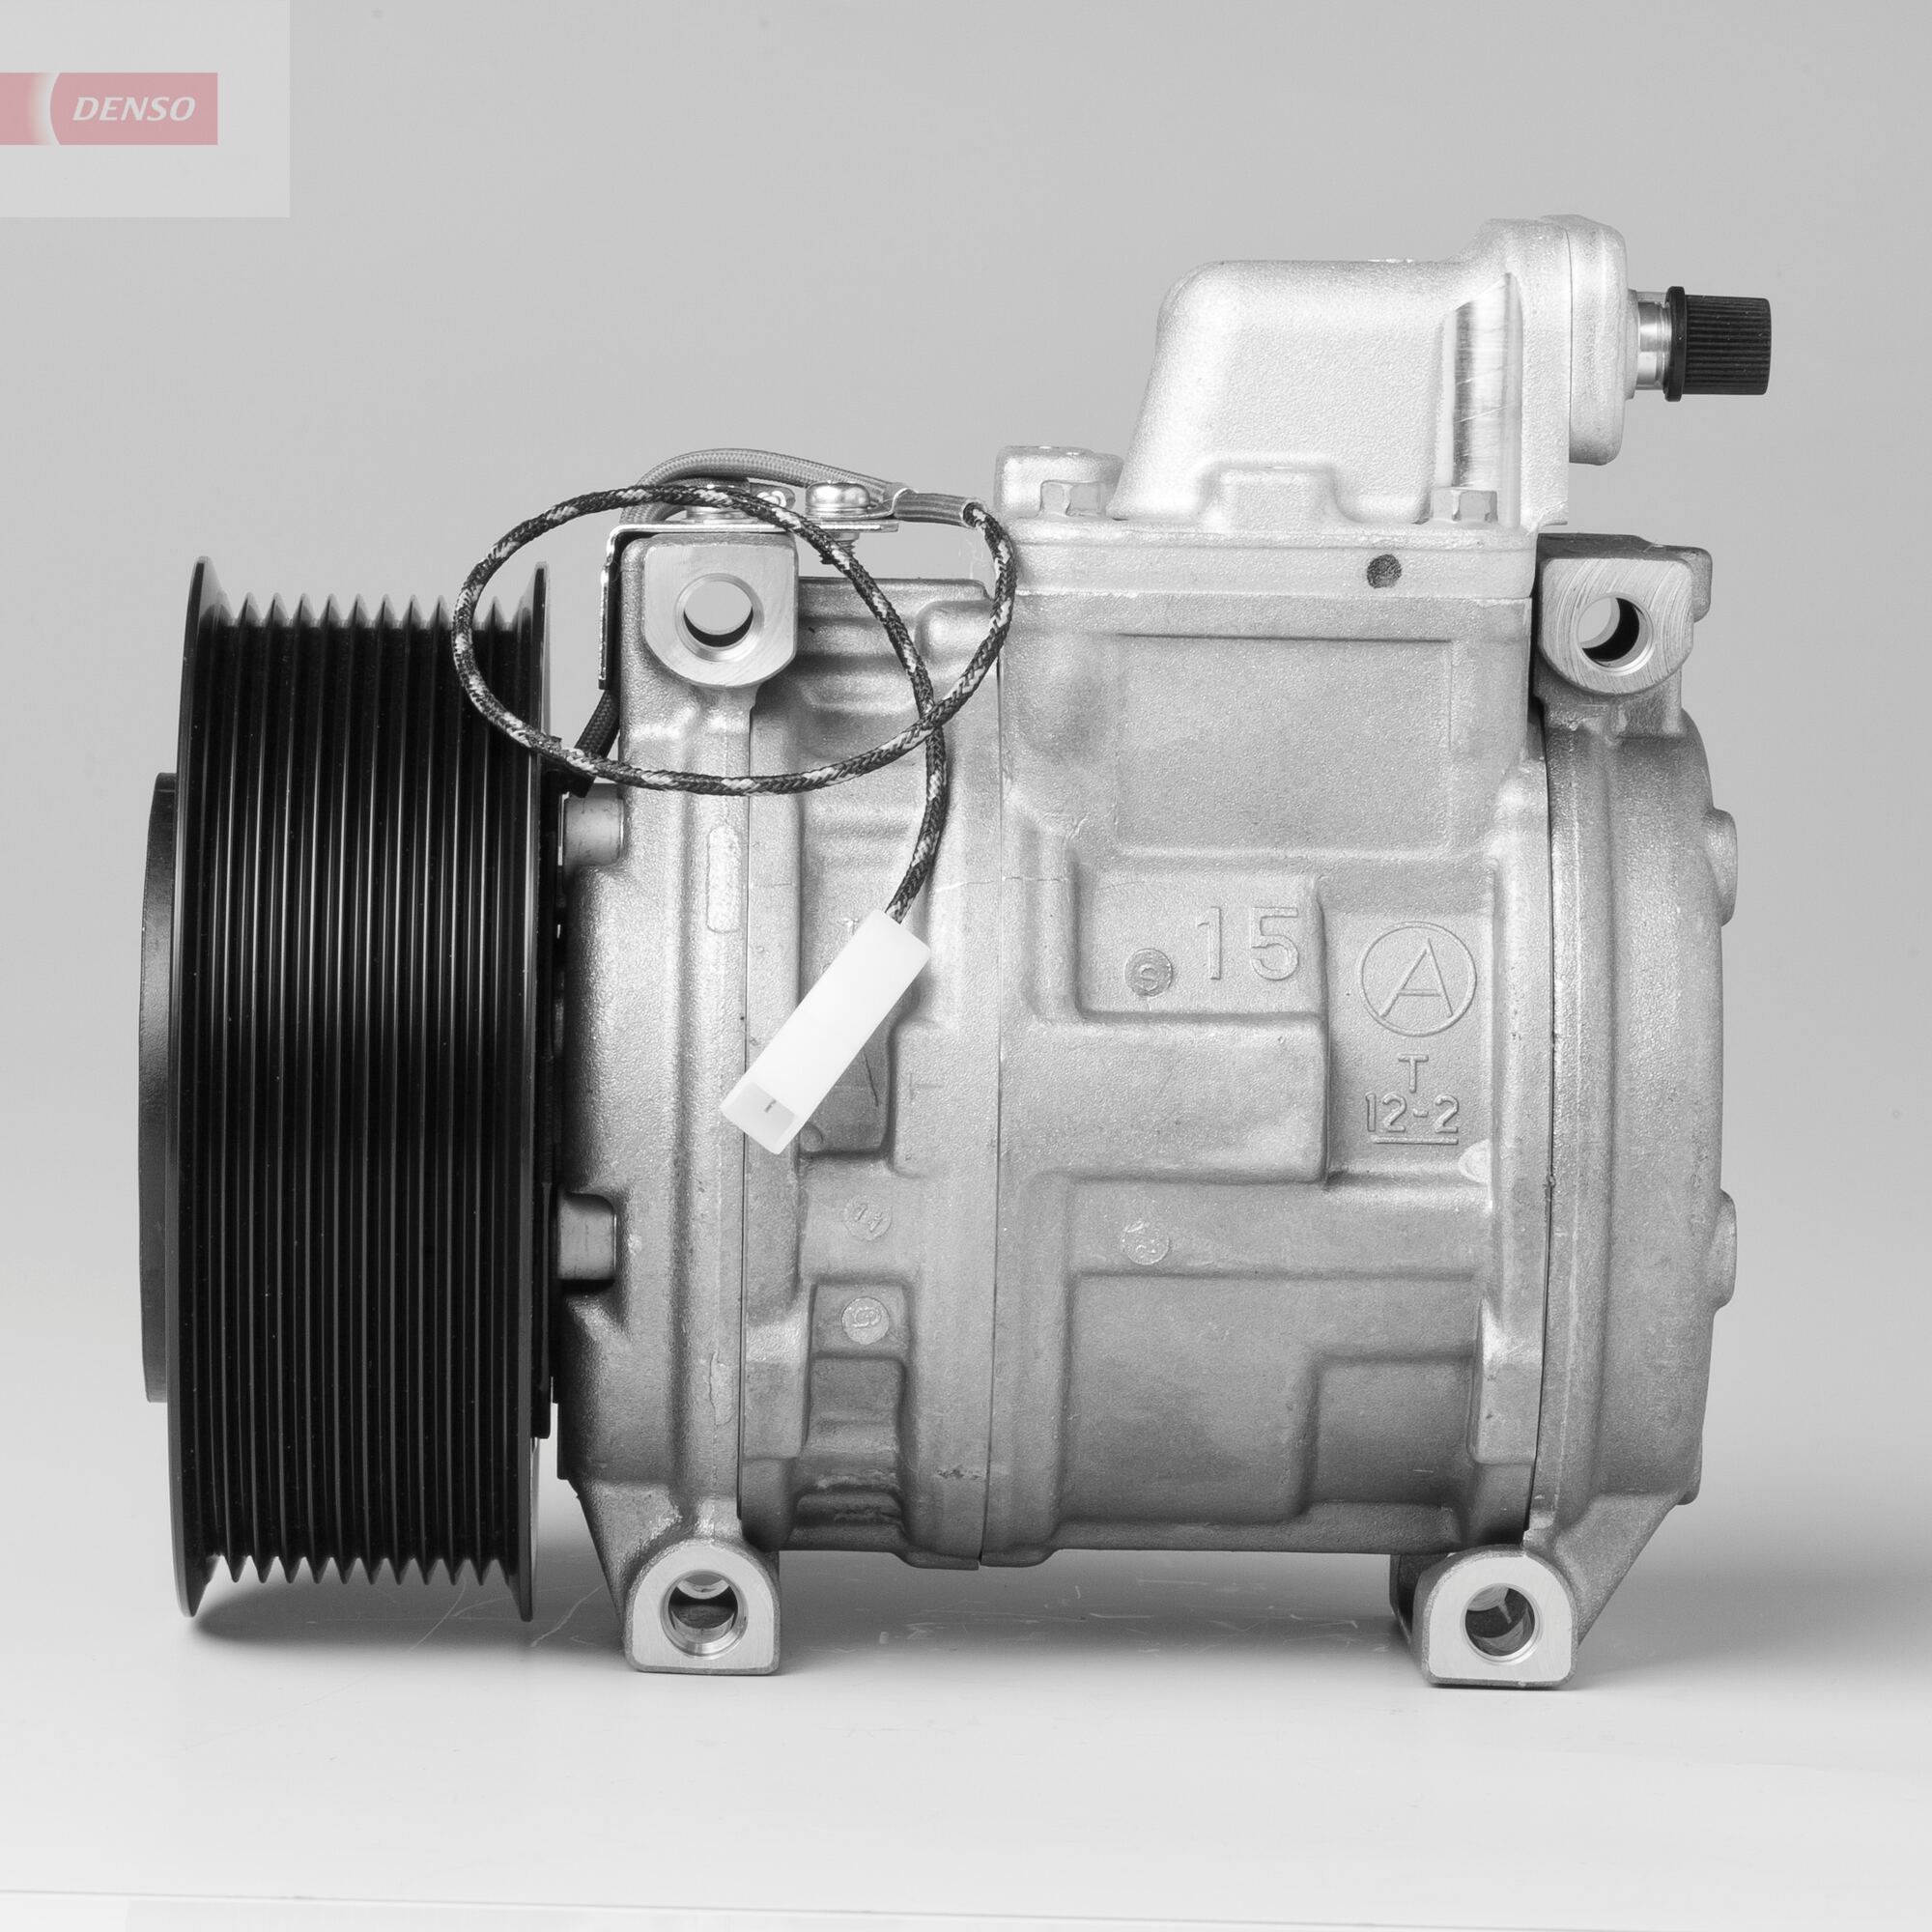 DENSO DCP17092 Air conditioning compressor 10PA15C, 24V, PAG 46, R 134a, with magnetic clutch